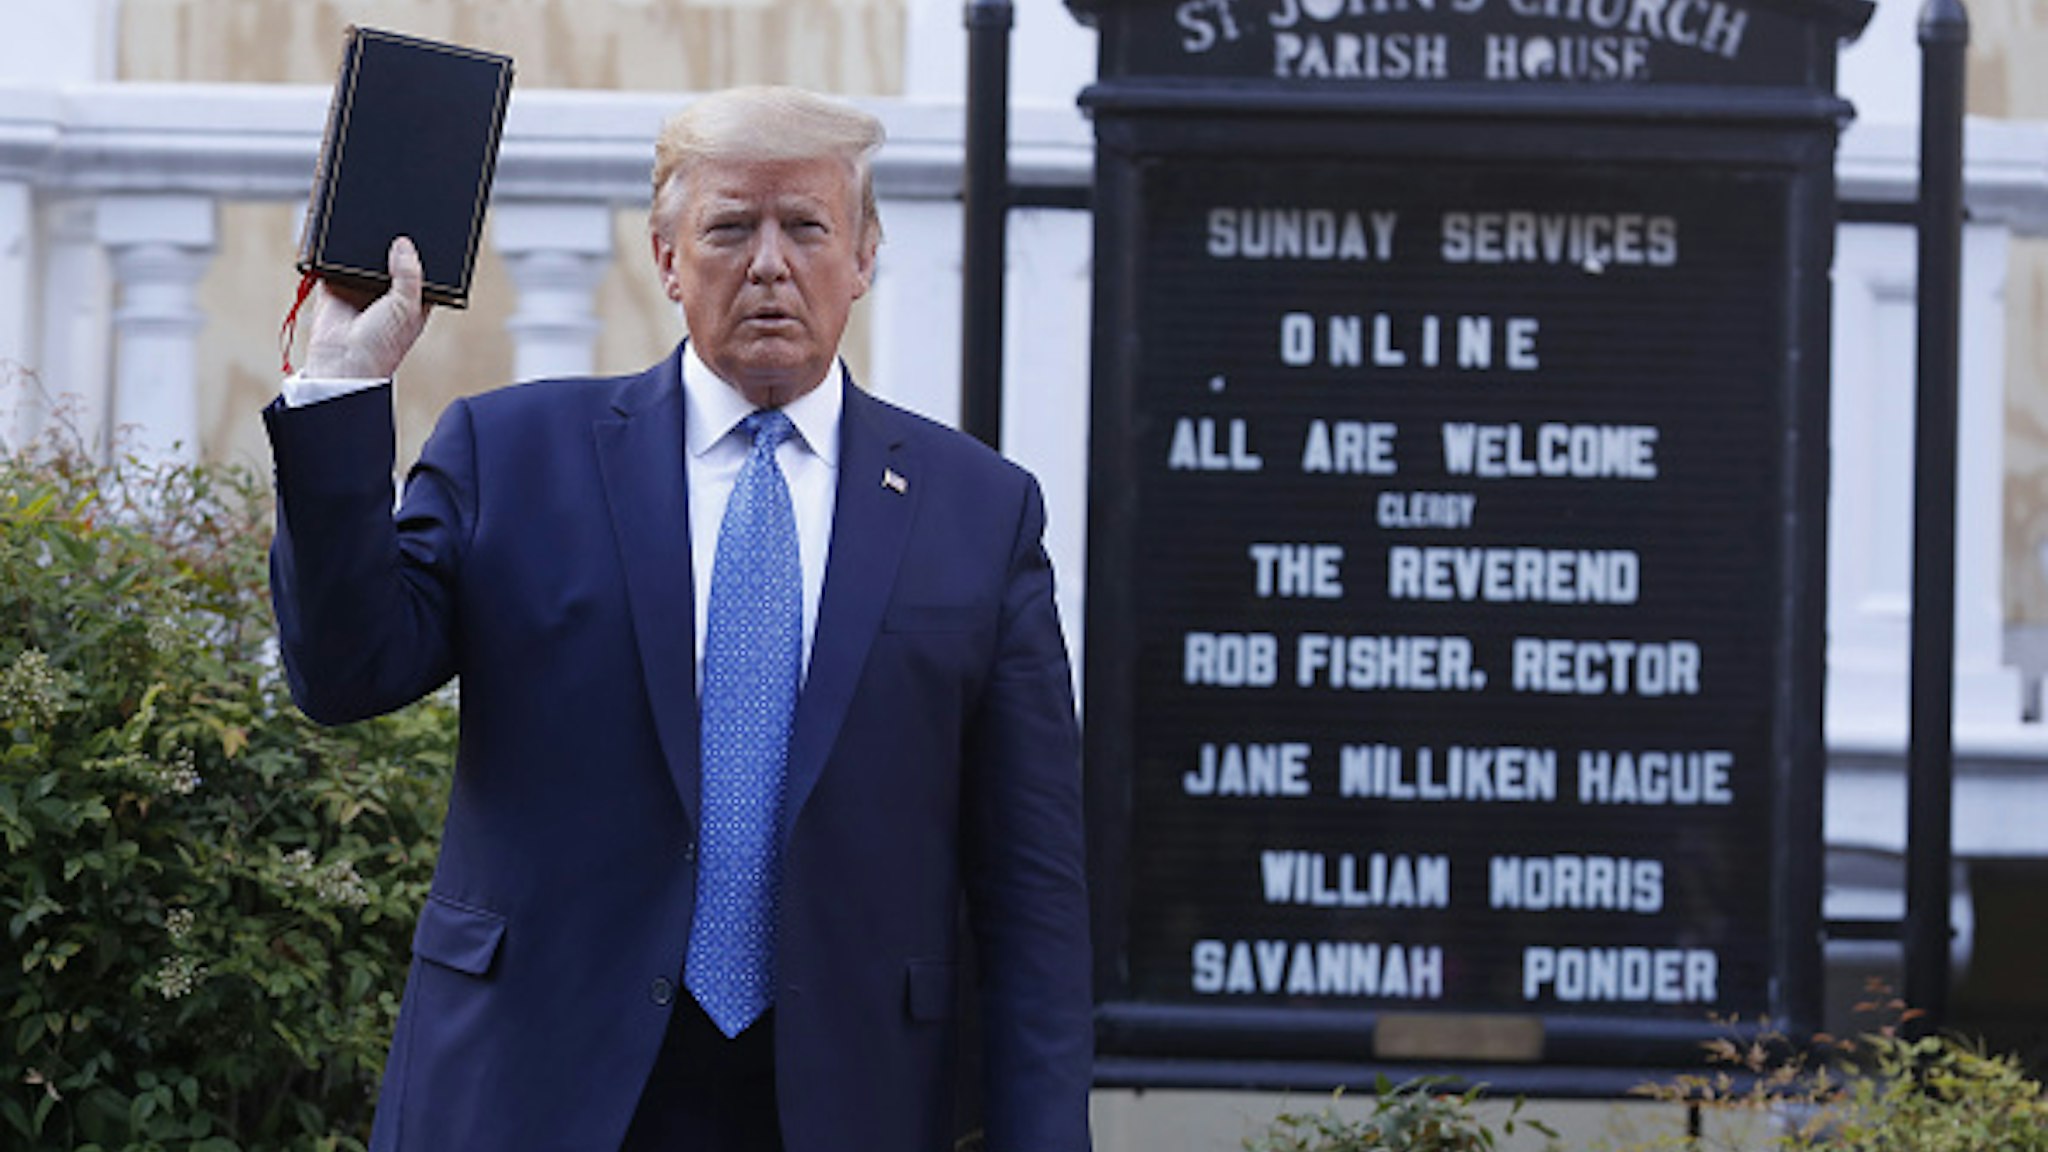 U.S. President Donald Trump poses with a bible outside St. John's Episcopal Church after a news conference in the Rose Garden of the White House in Washington, D.C., U.S., on Monday, June 1, 2020. Trump promised a forceful response to violent protests across the country before leaving the White House to visit a church across the street that had been been damaged by fires.